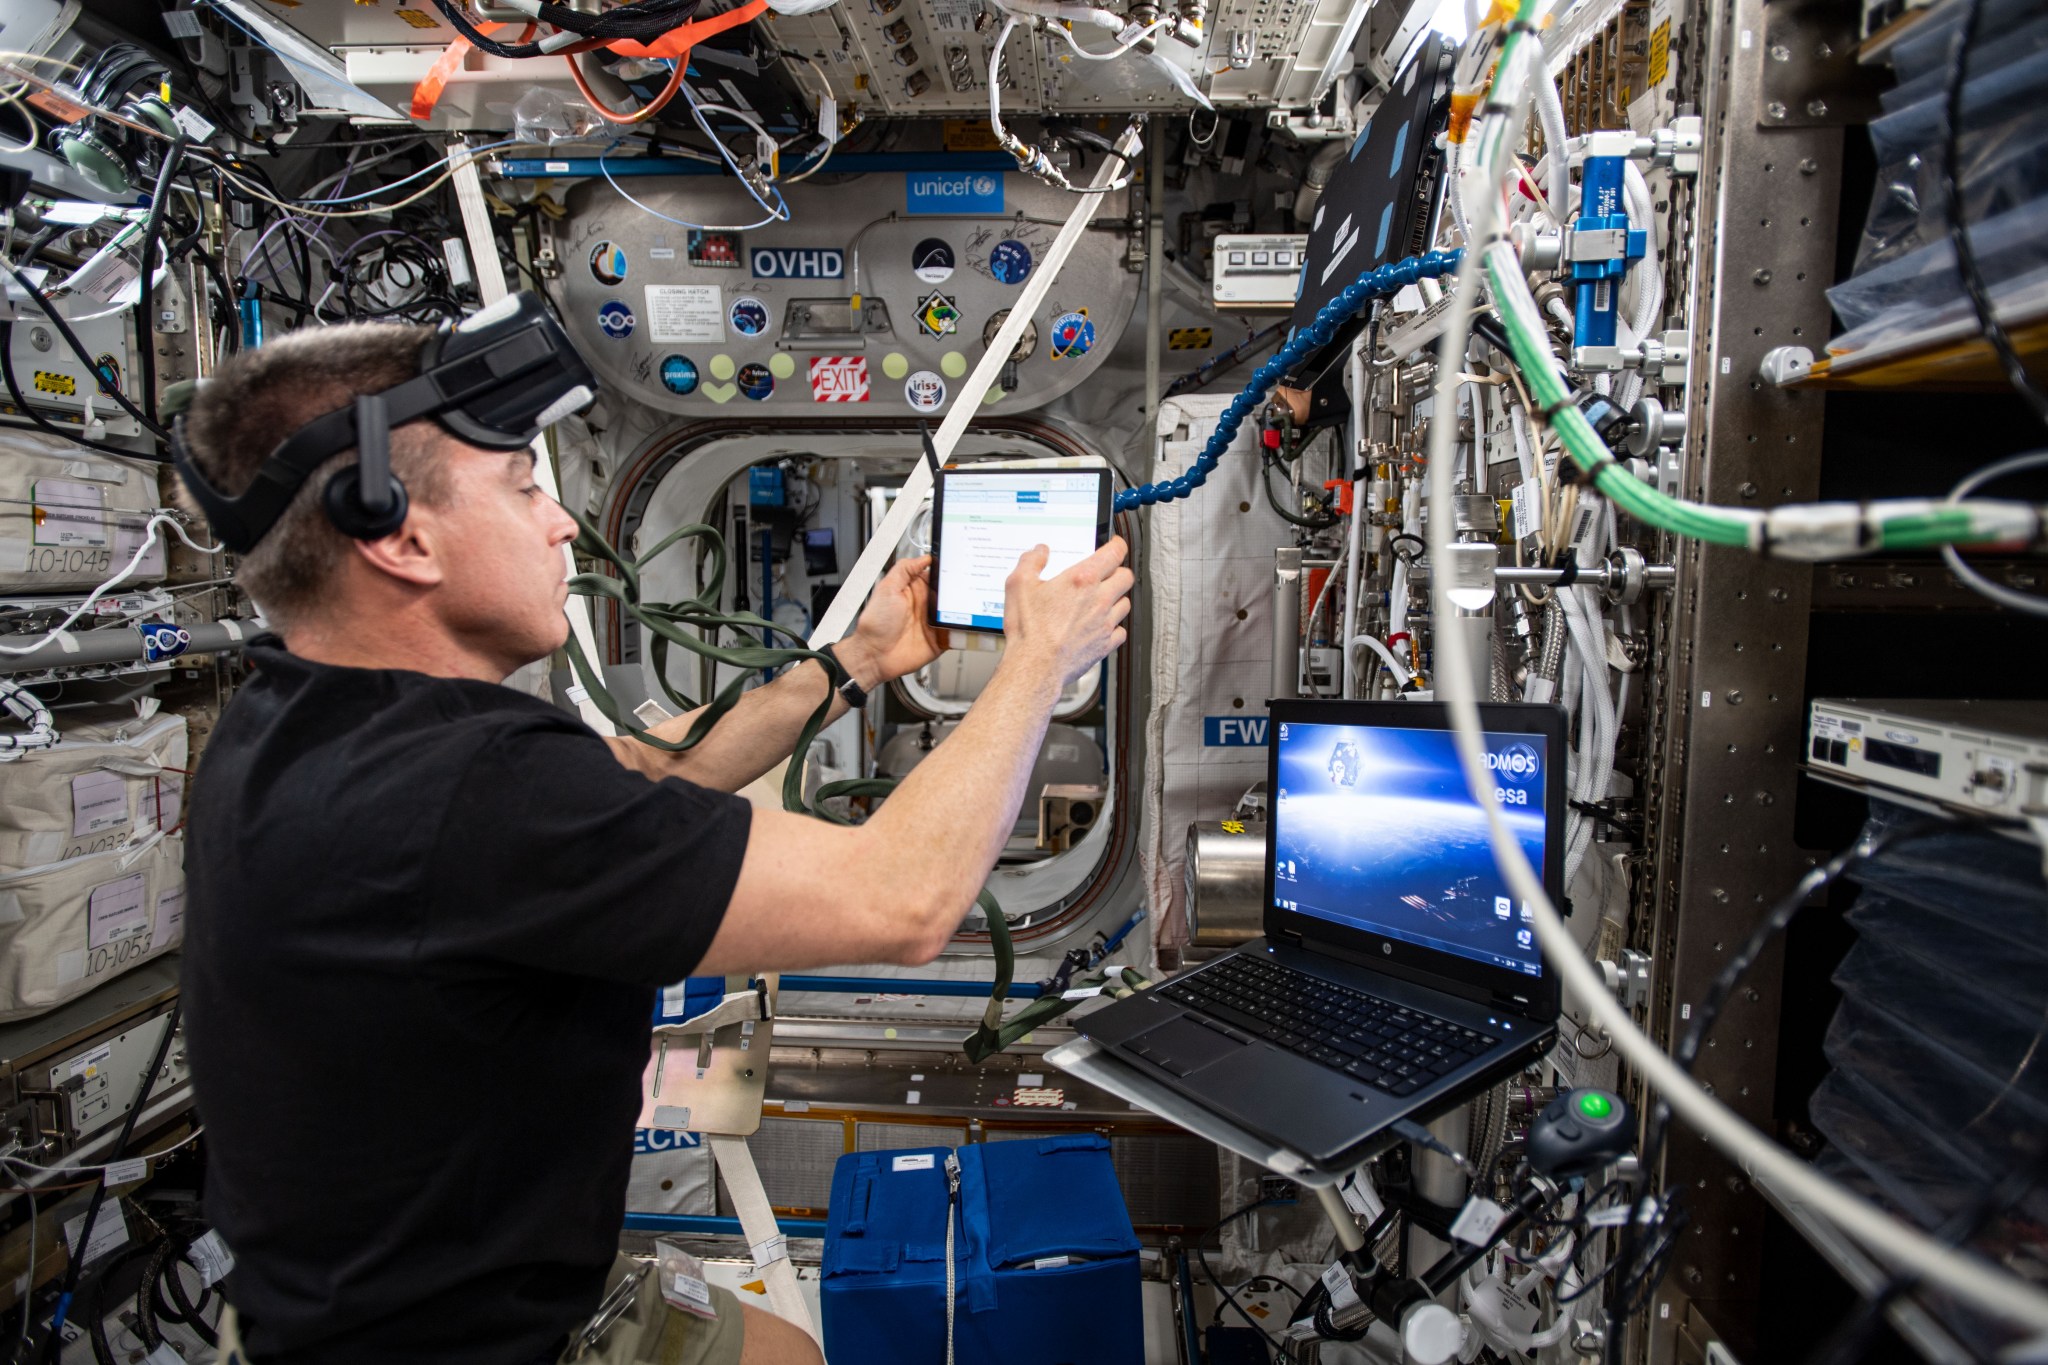 Expedition 63 Commander Chris Cassidy during the preparation of the Vection experiment